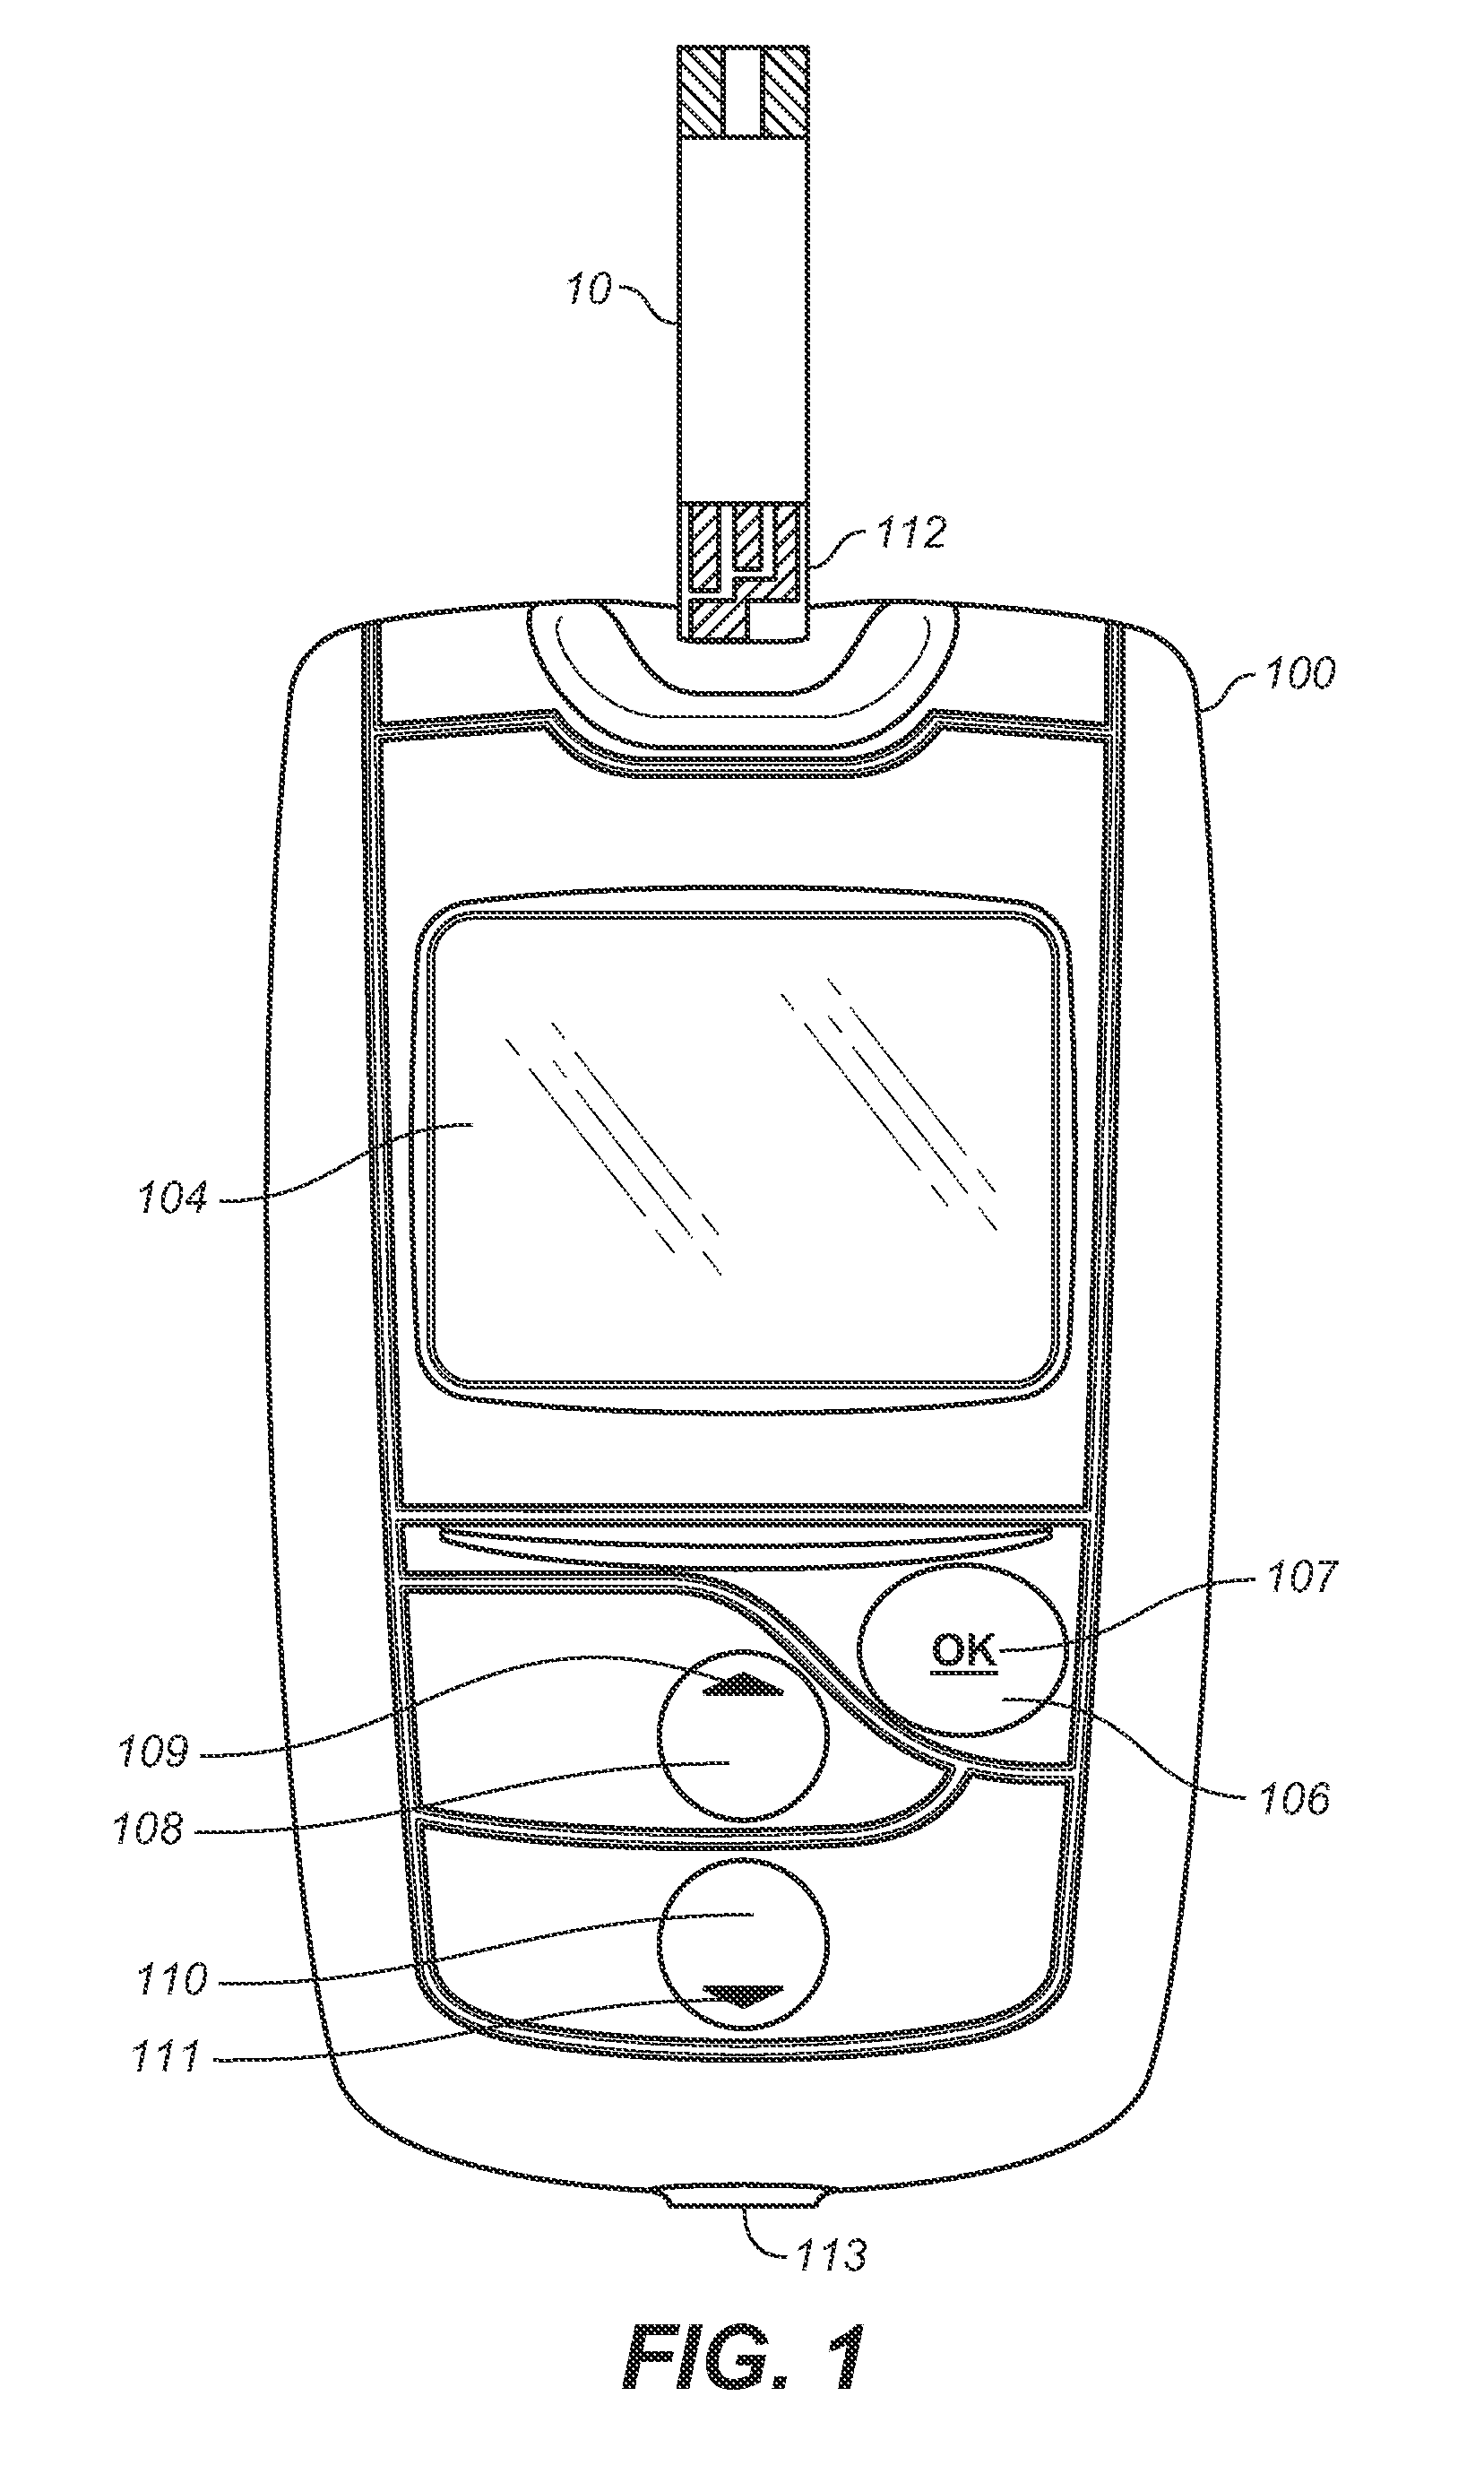 Analyte Measurement and Management Device and Associated Methods